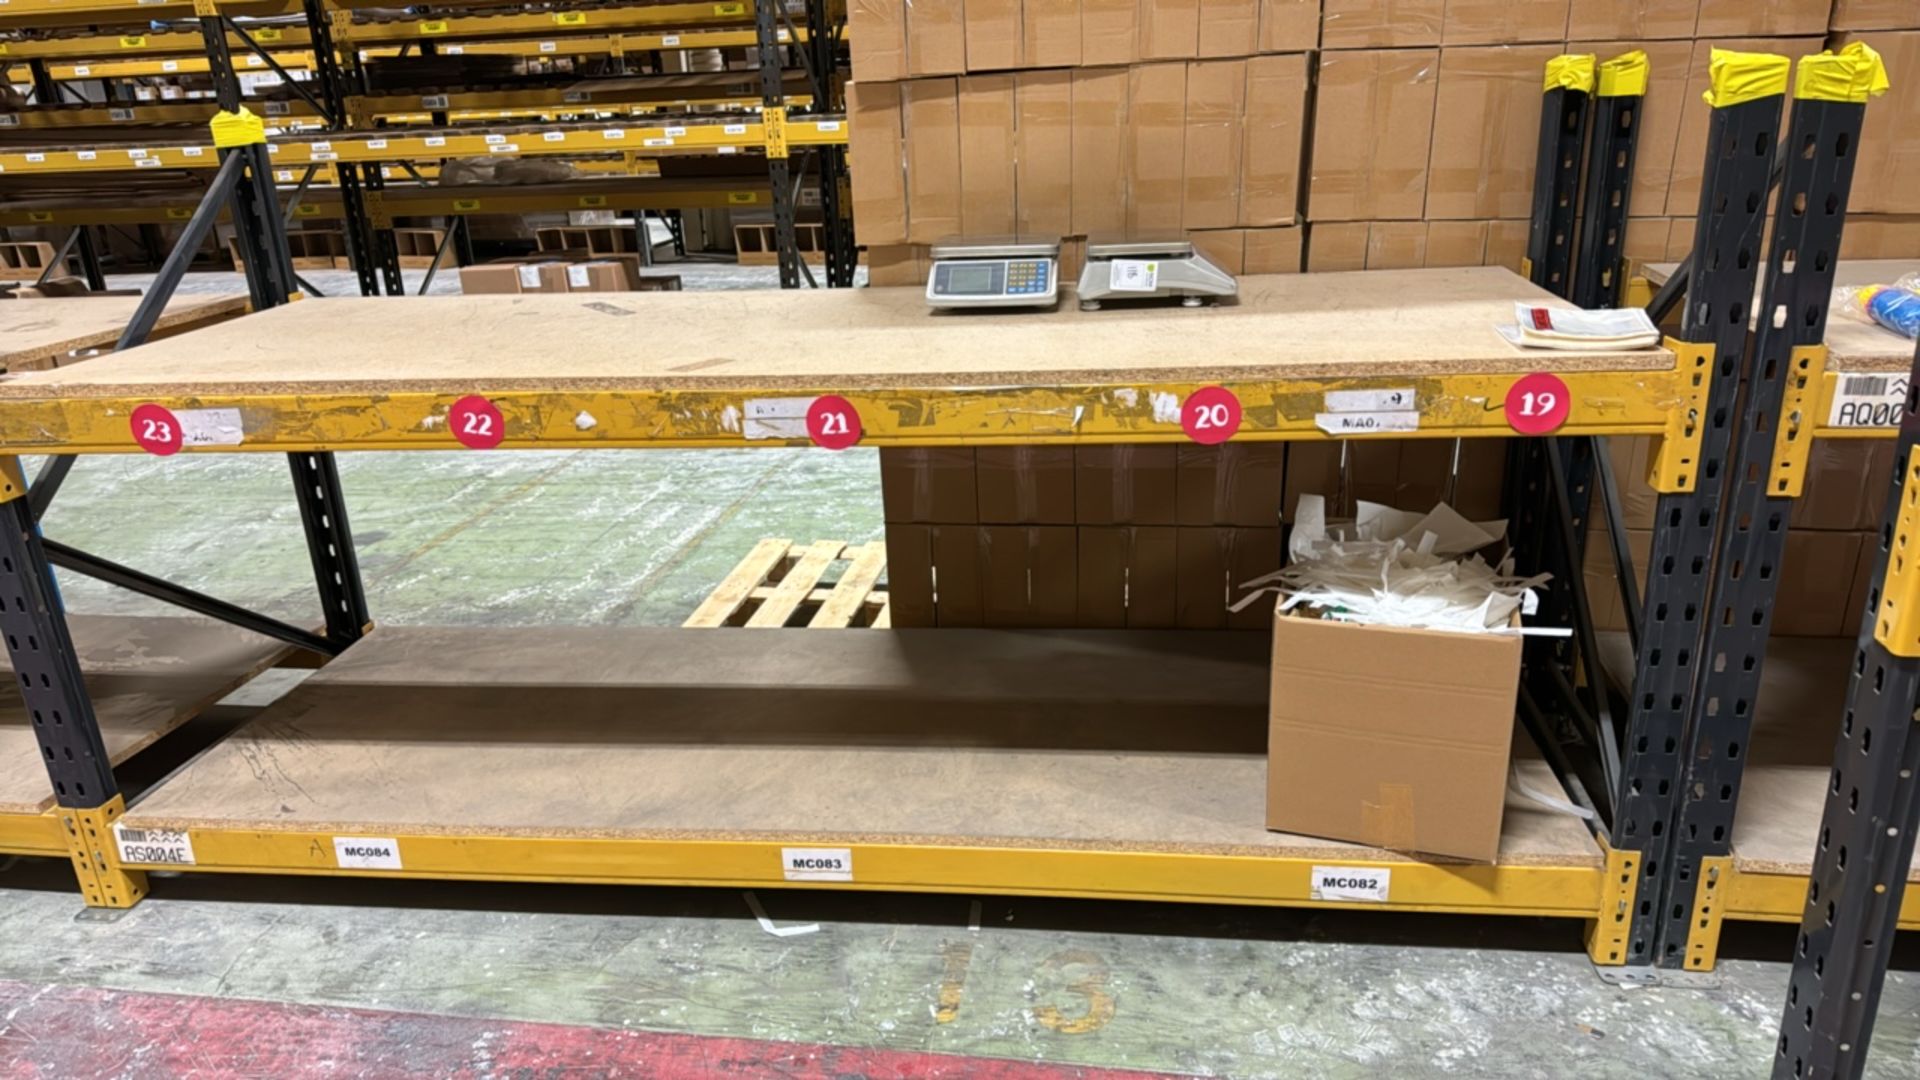 7 Bays of Boltless Industrial Pallet Racking - Image 2 of 4